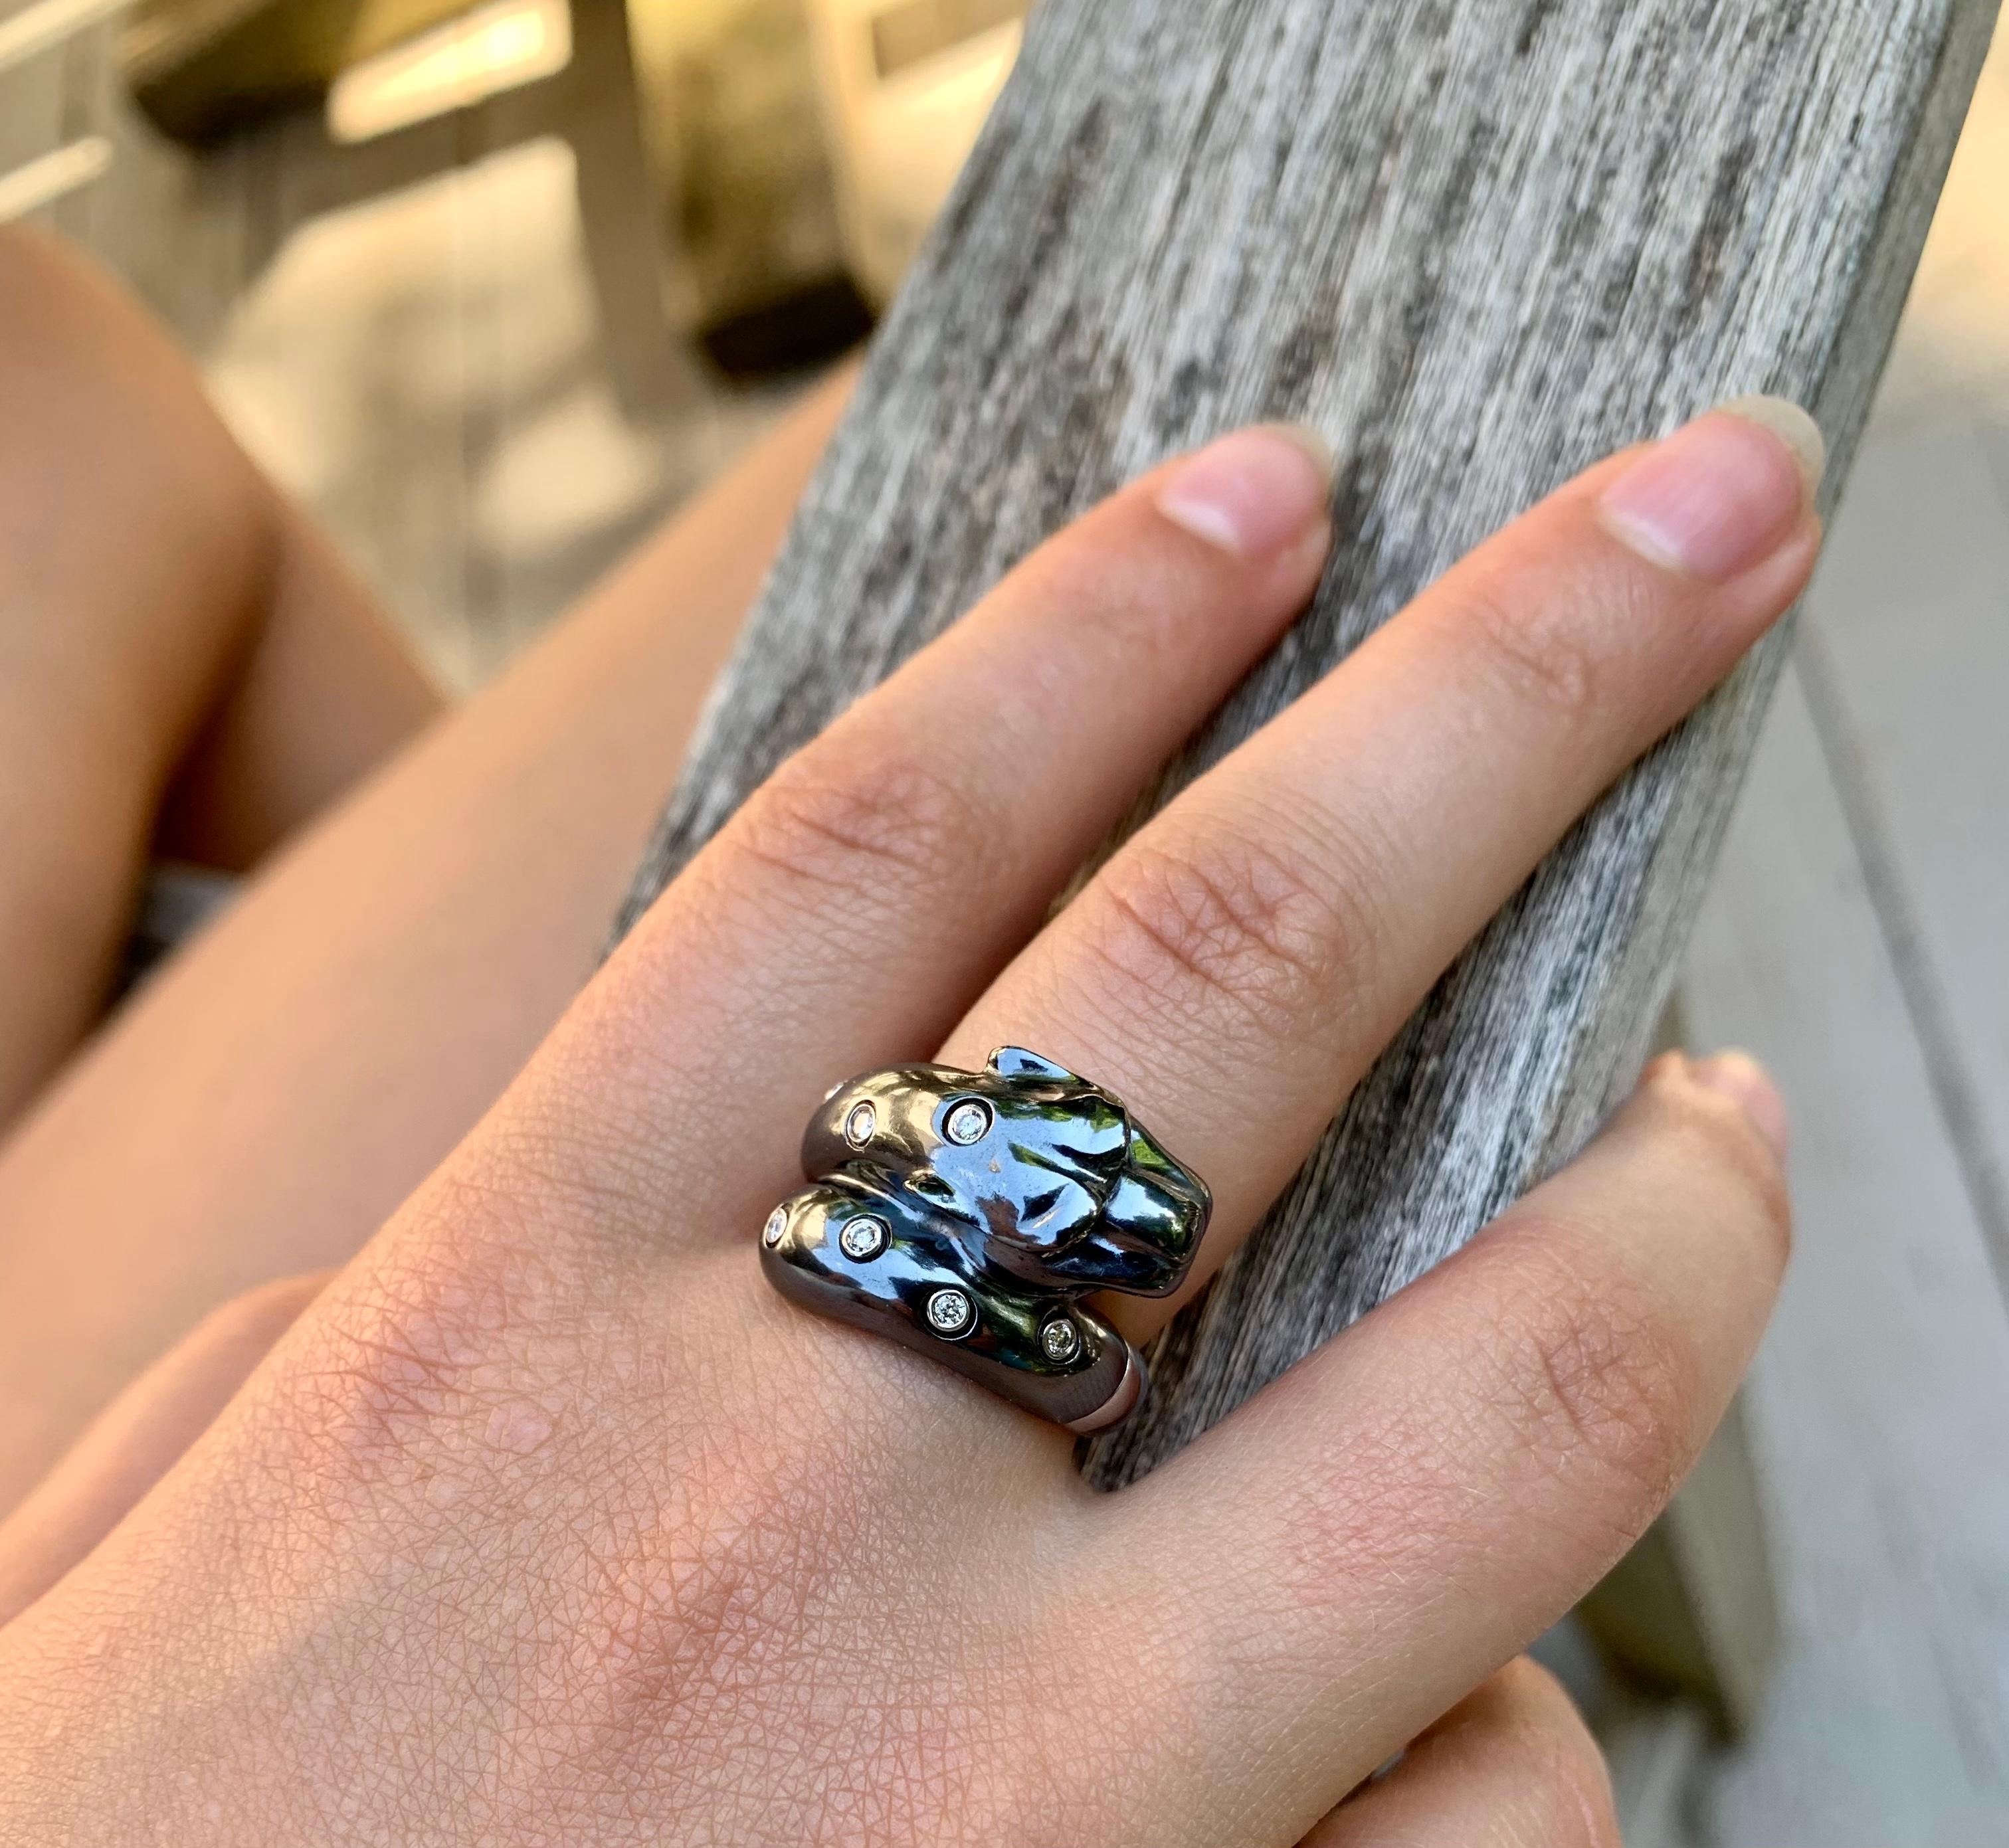 Elegant estate panther ring, diamond set 18K white and blackened gold.
Marks: 18K, 750, jeweler's mark, numbered
Size 7.5 US
23mm by 14mm
Excellent condition
The panther epitomizes power, beauty and grace. This fabulous feline has created a